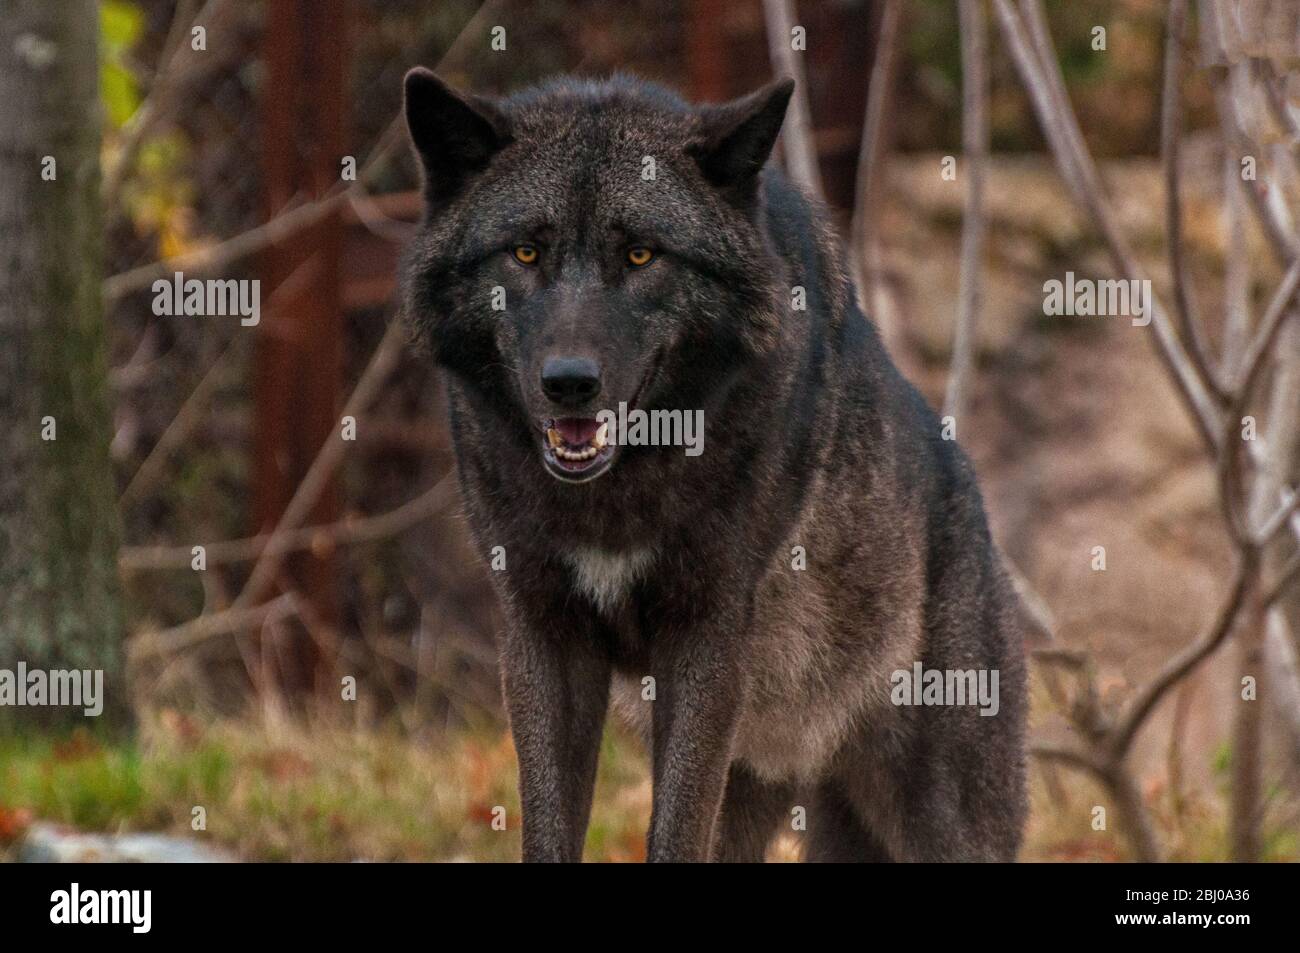 A timber wolf roams through the bushes Stock Photo